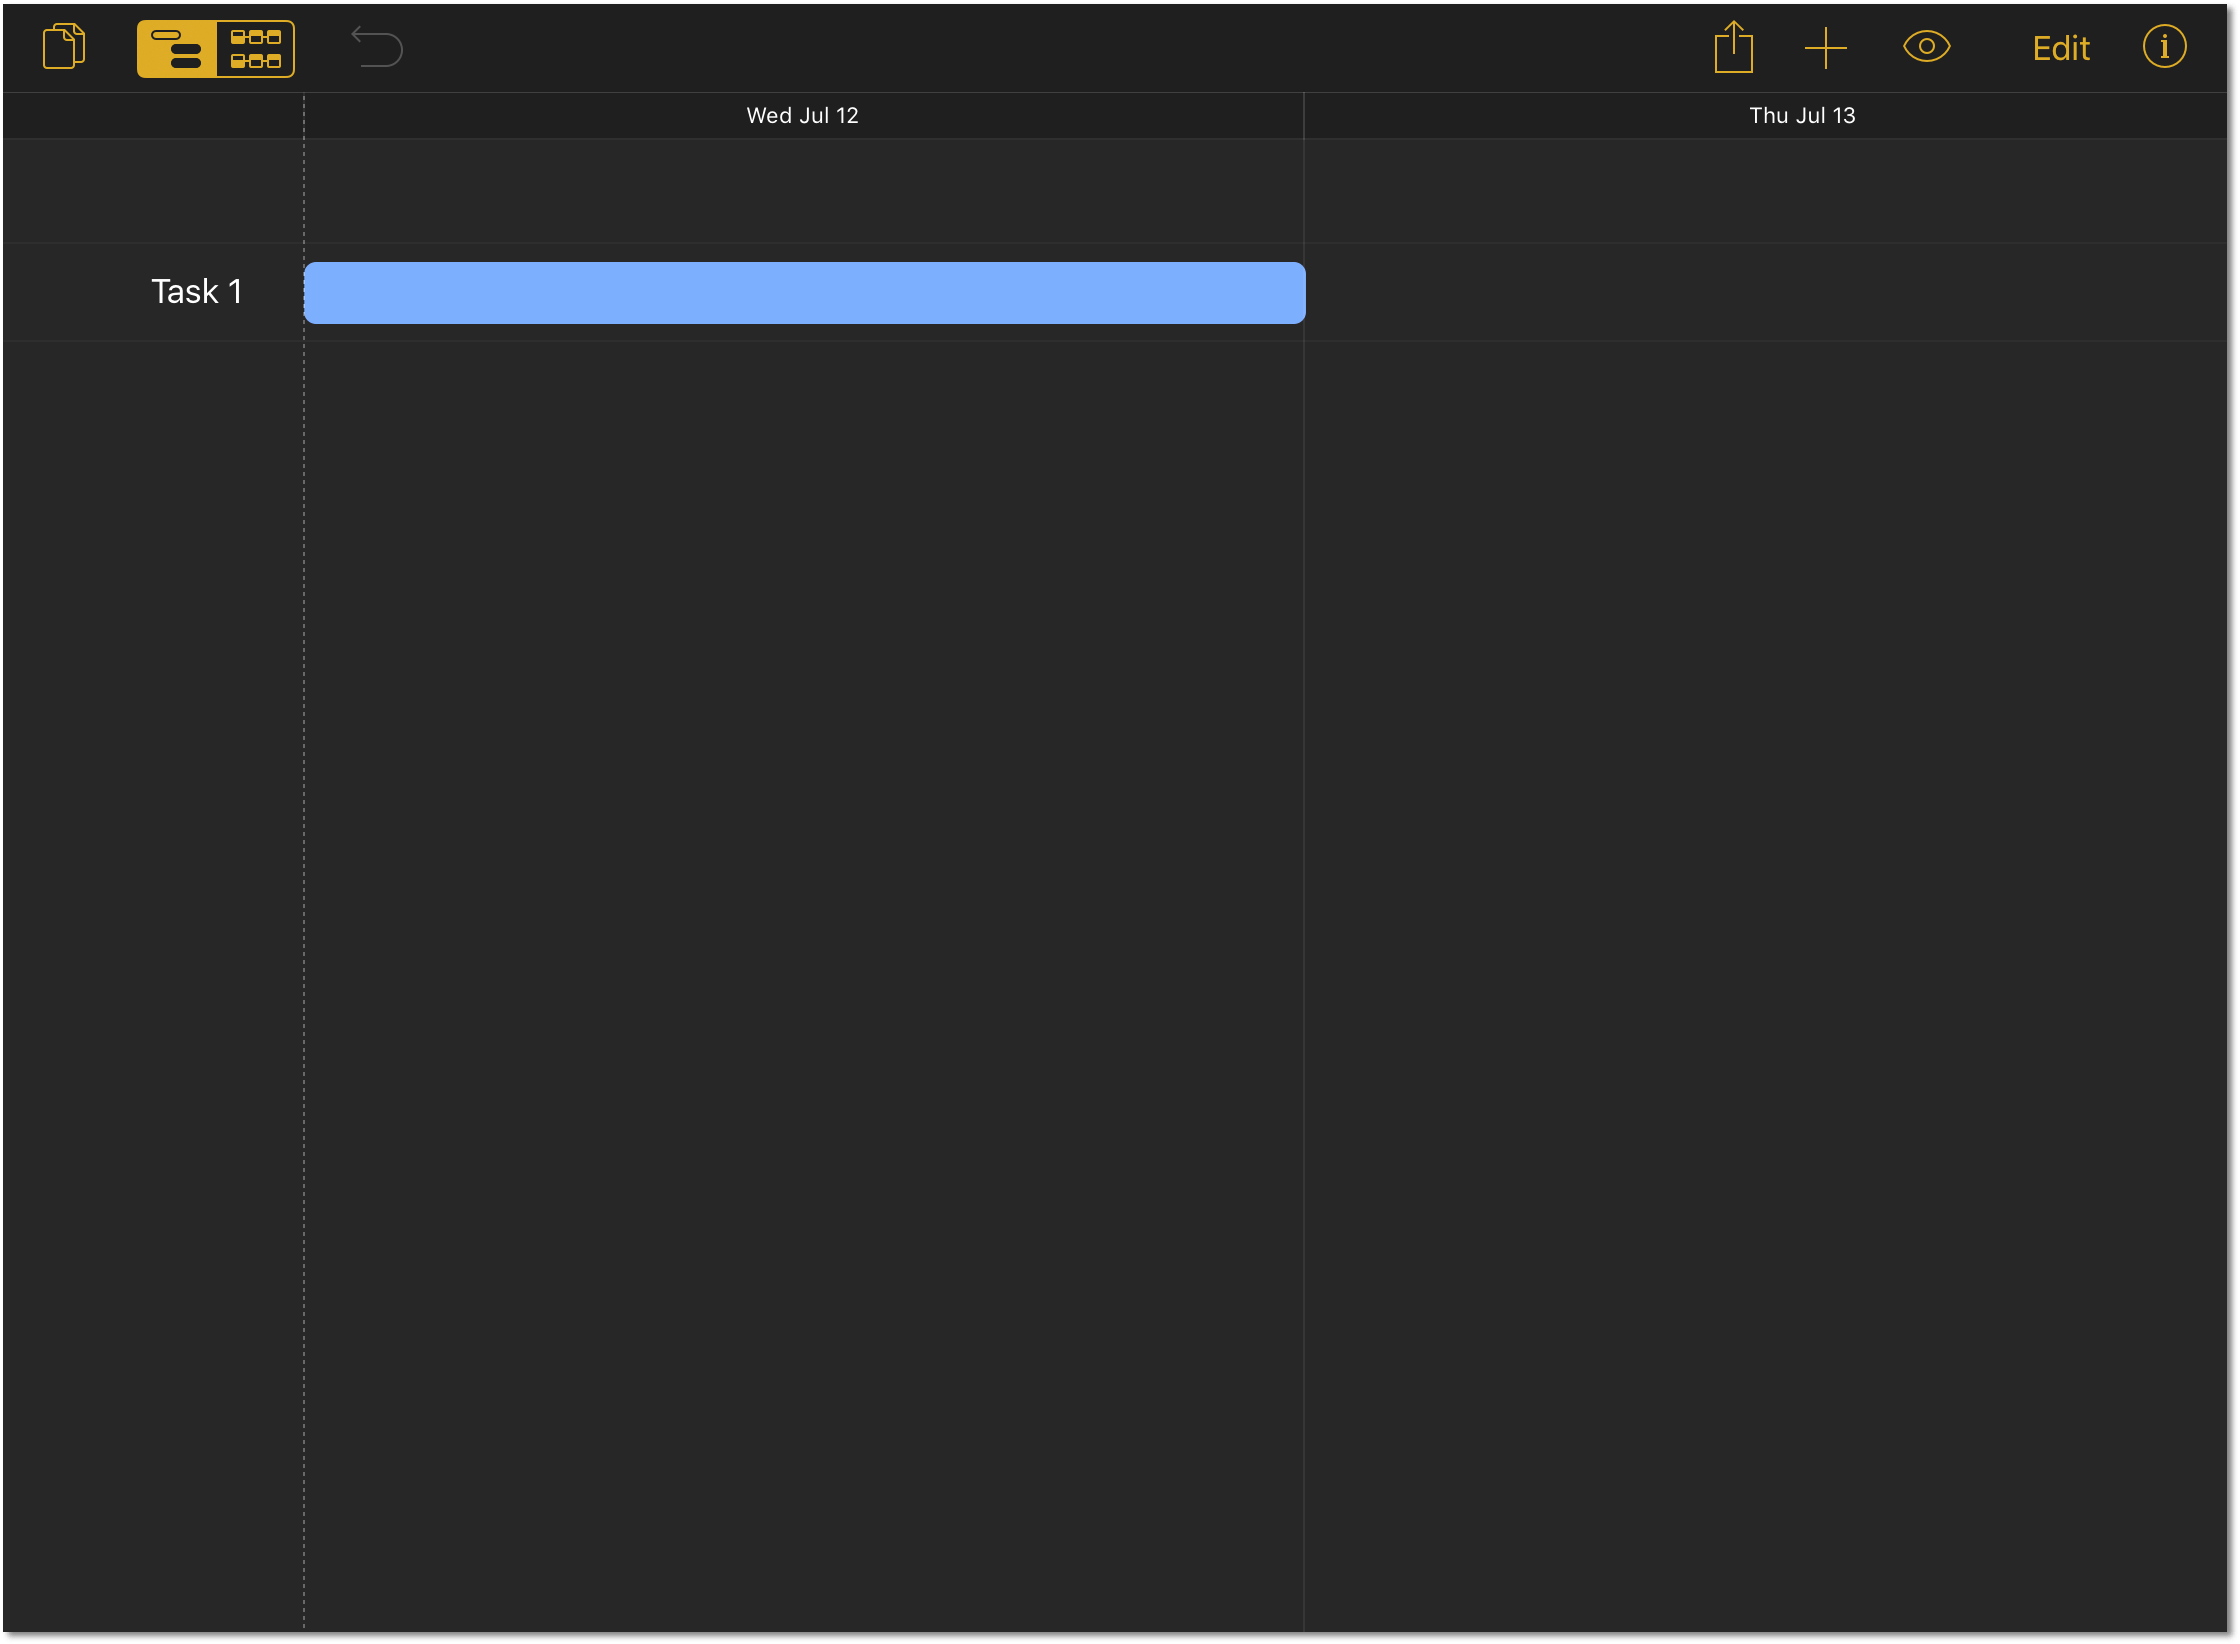 A new project editing window with dark mode shows the background of OmniPlan as a very dark brown color with orange buttons.